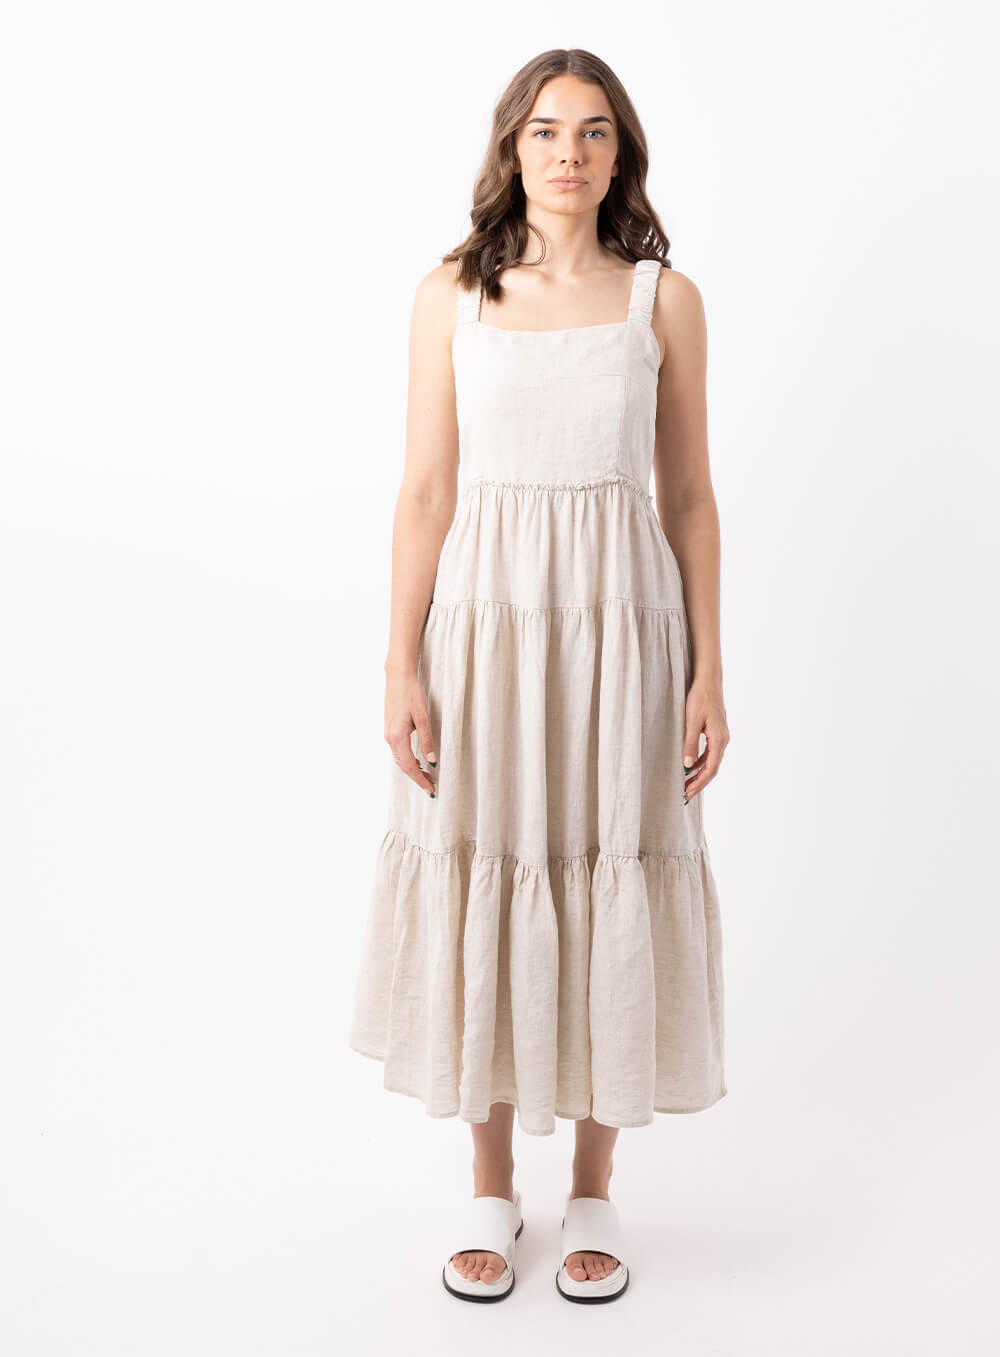 The Finlay Linen dress in beige is made from 100% breathable linen, featuring a tiered skirt, thin rouched straps and 2 side pockets